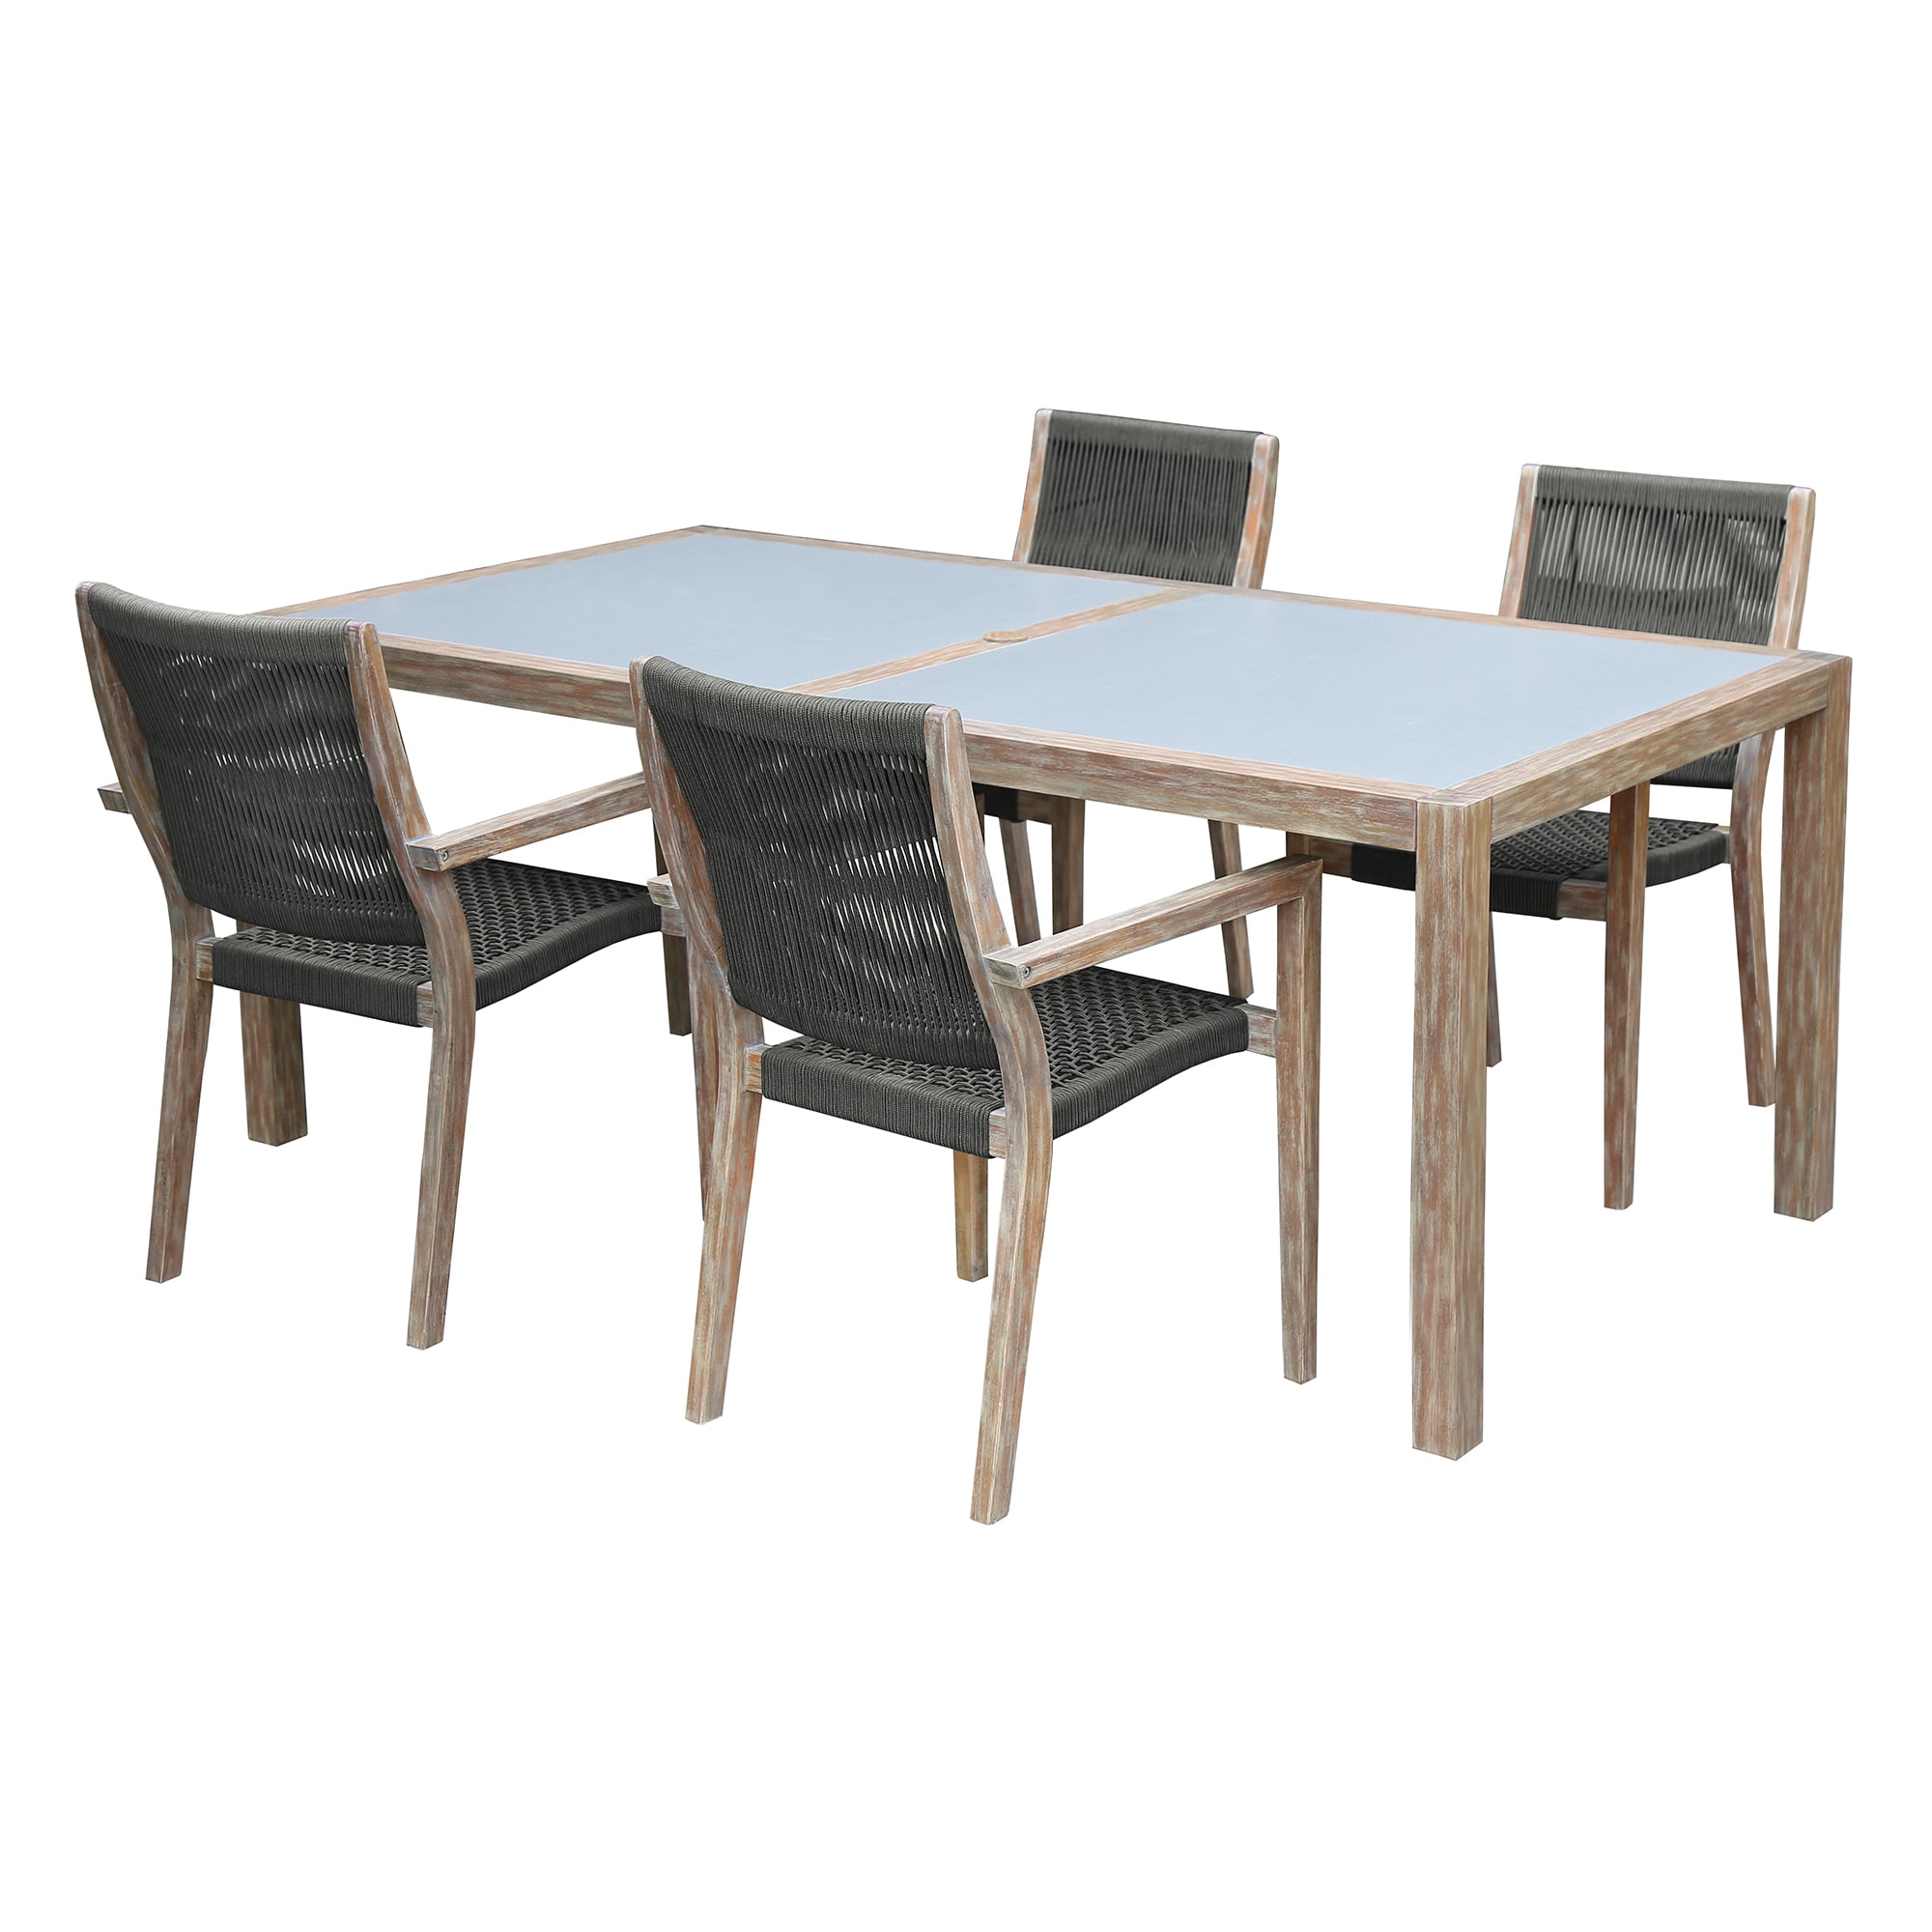 Sienna and Madsen 5 Piece Outdoor Eucalyptus Dining Set with Teak Finish in Gray